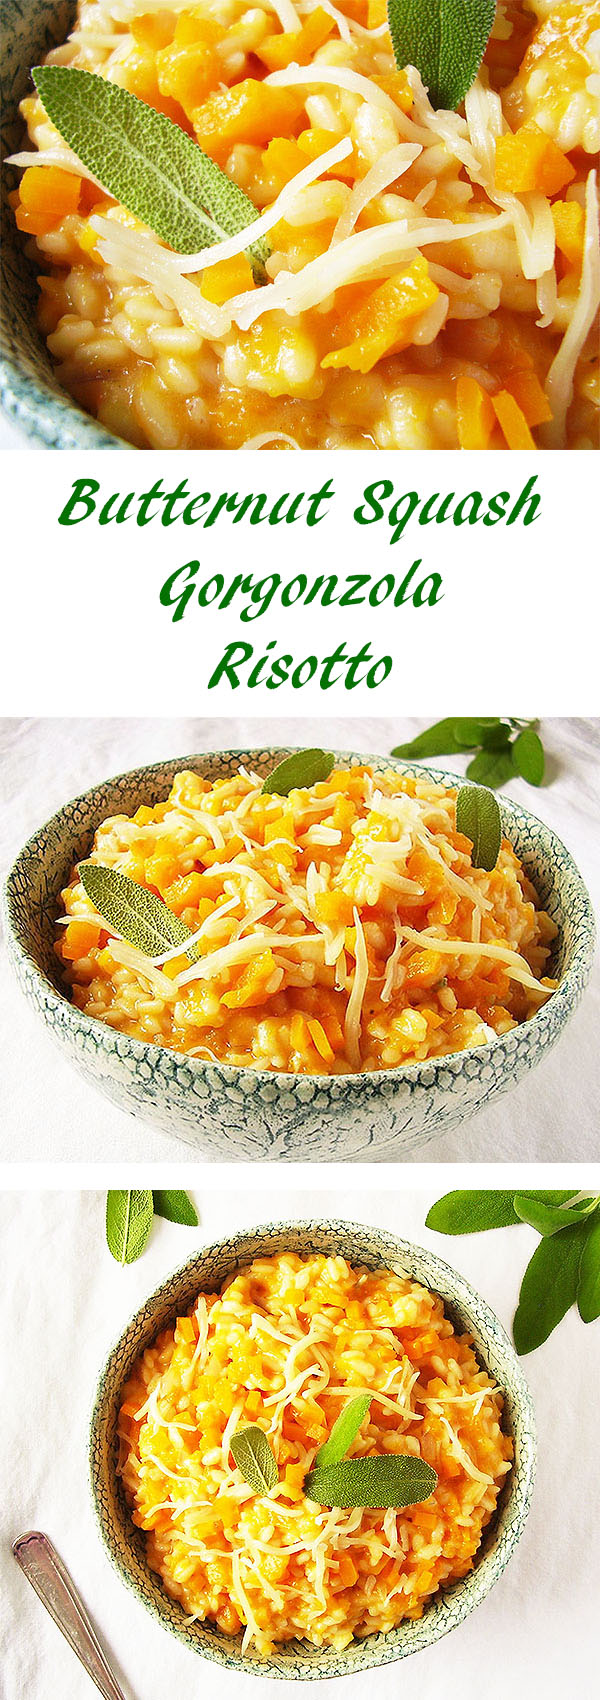 Butternut Squash Gorgonzola Risotto : in the mood… Italian blue cheese, some Arborio rice and butternut squash to have the best risotto; easy, delicious, simple dinner for colder days. Comfort food, Italian way !